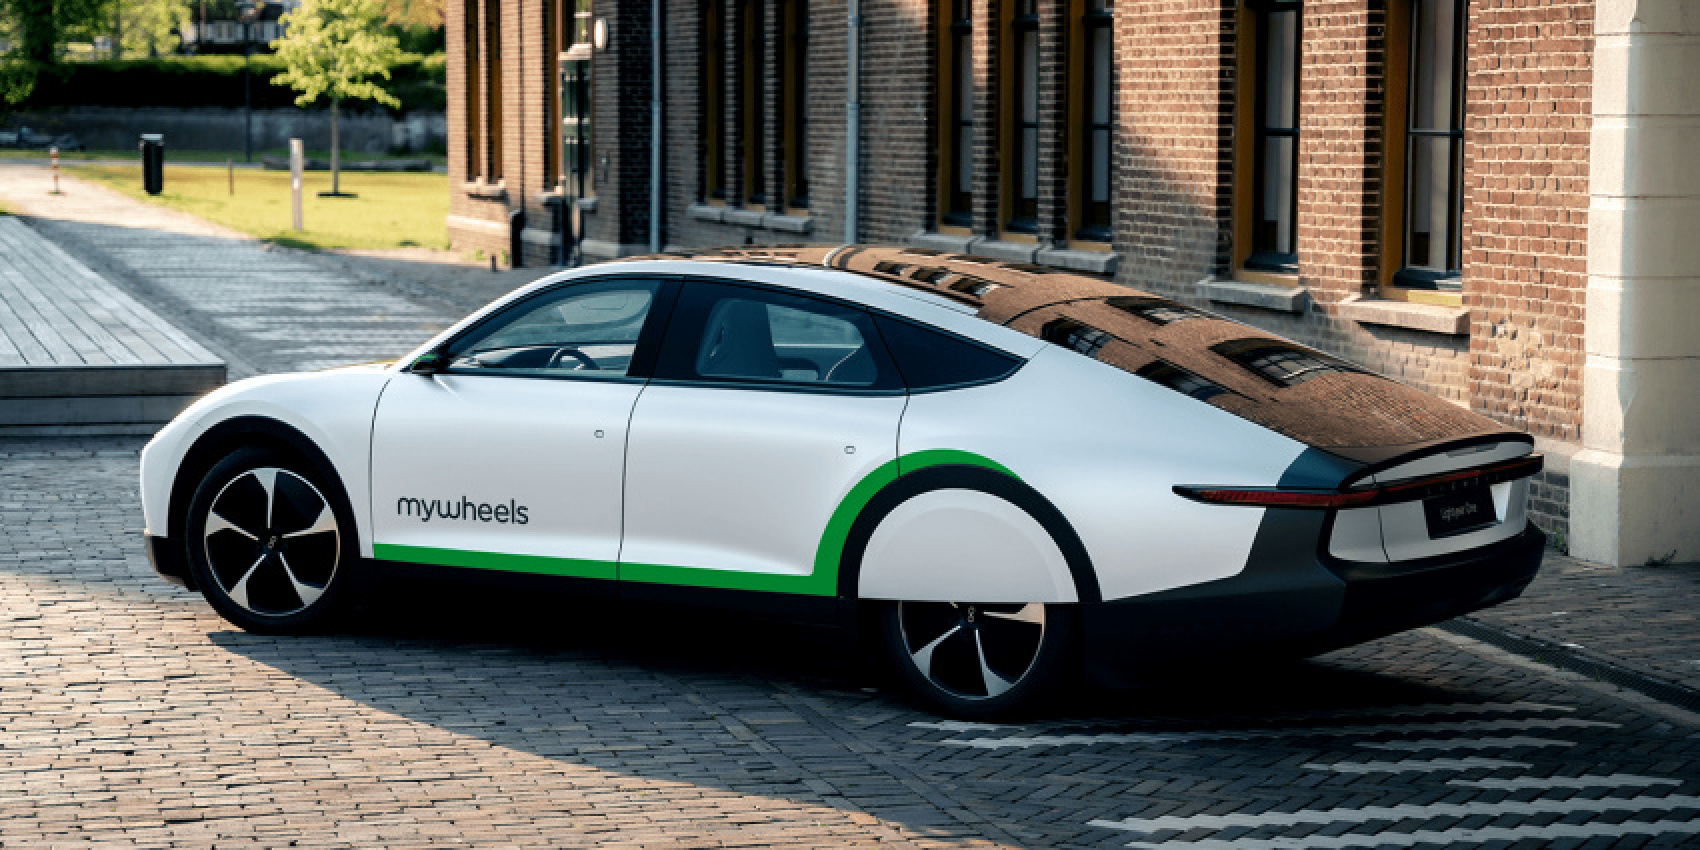 autos, cars, electric vehicle, fleets, electric car-sharing, lightyear, lightyear one, lightyear two, mywheels, startup, the netherlands, the sharing group, vnex, 5,000 lightyear electric cars for sharing via mywheels